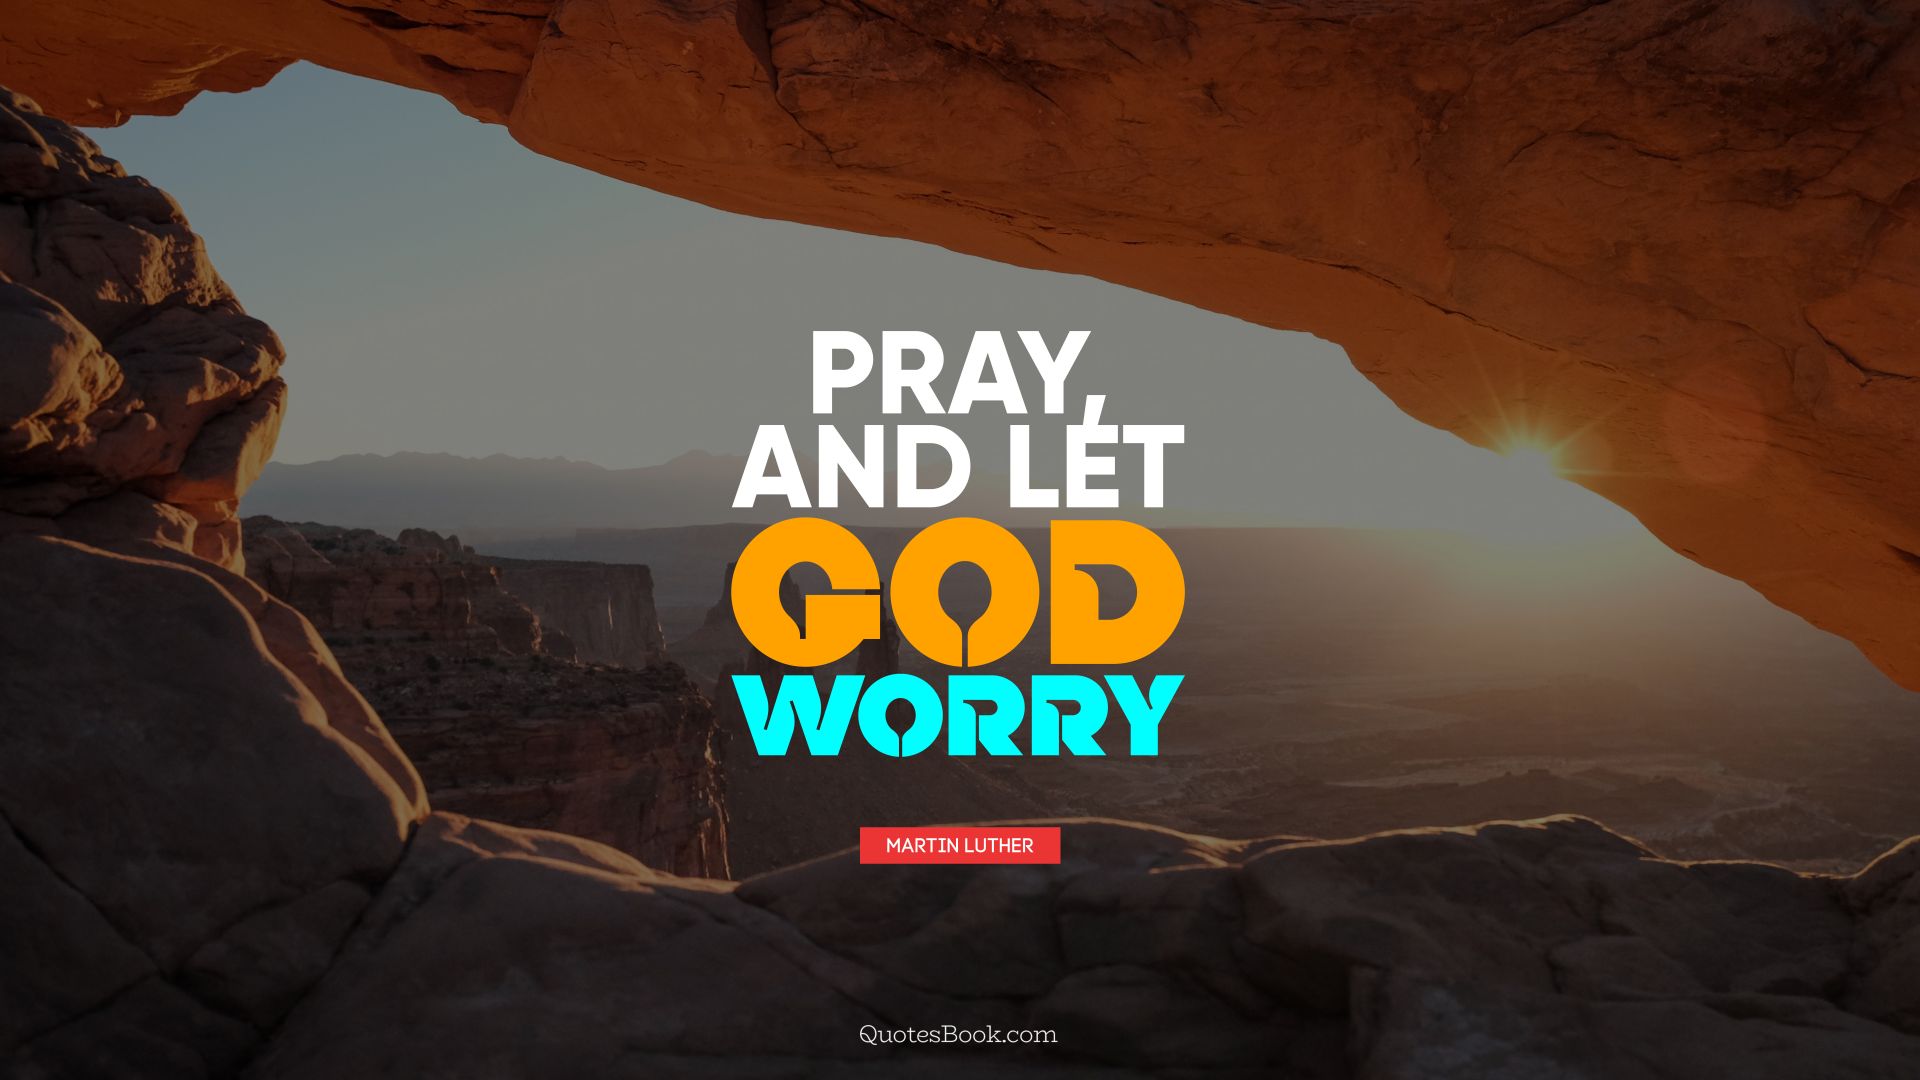 Pray, and let God worry. - Quote by Martin Luther